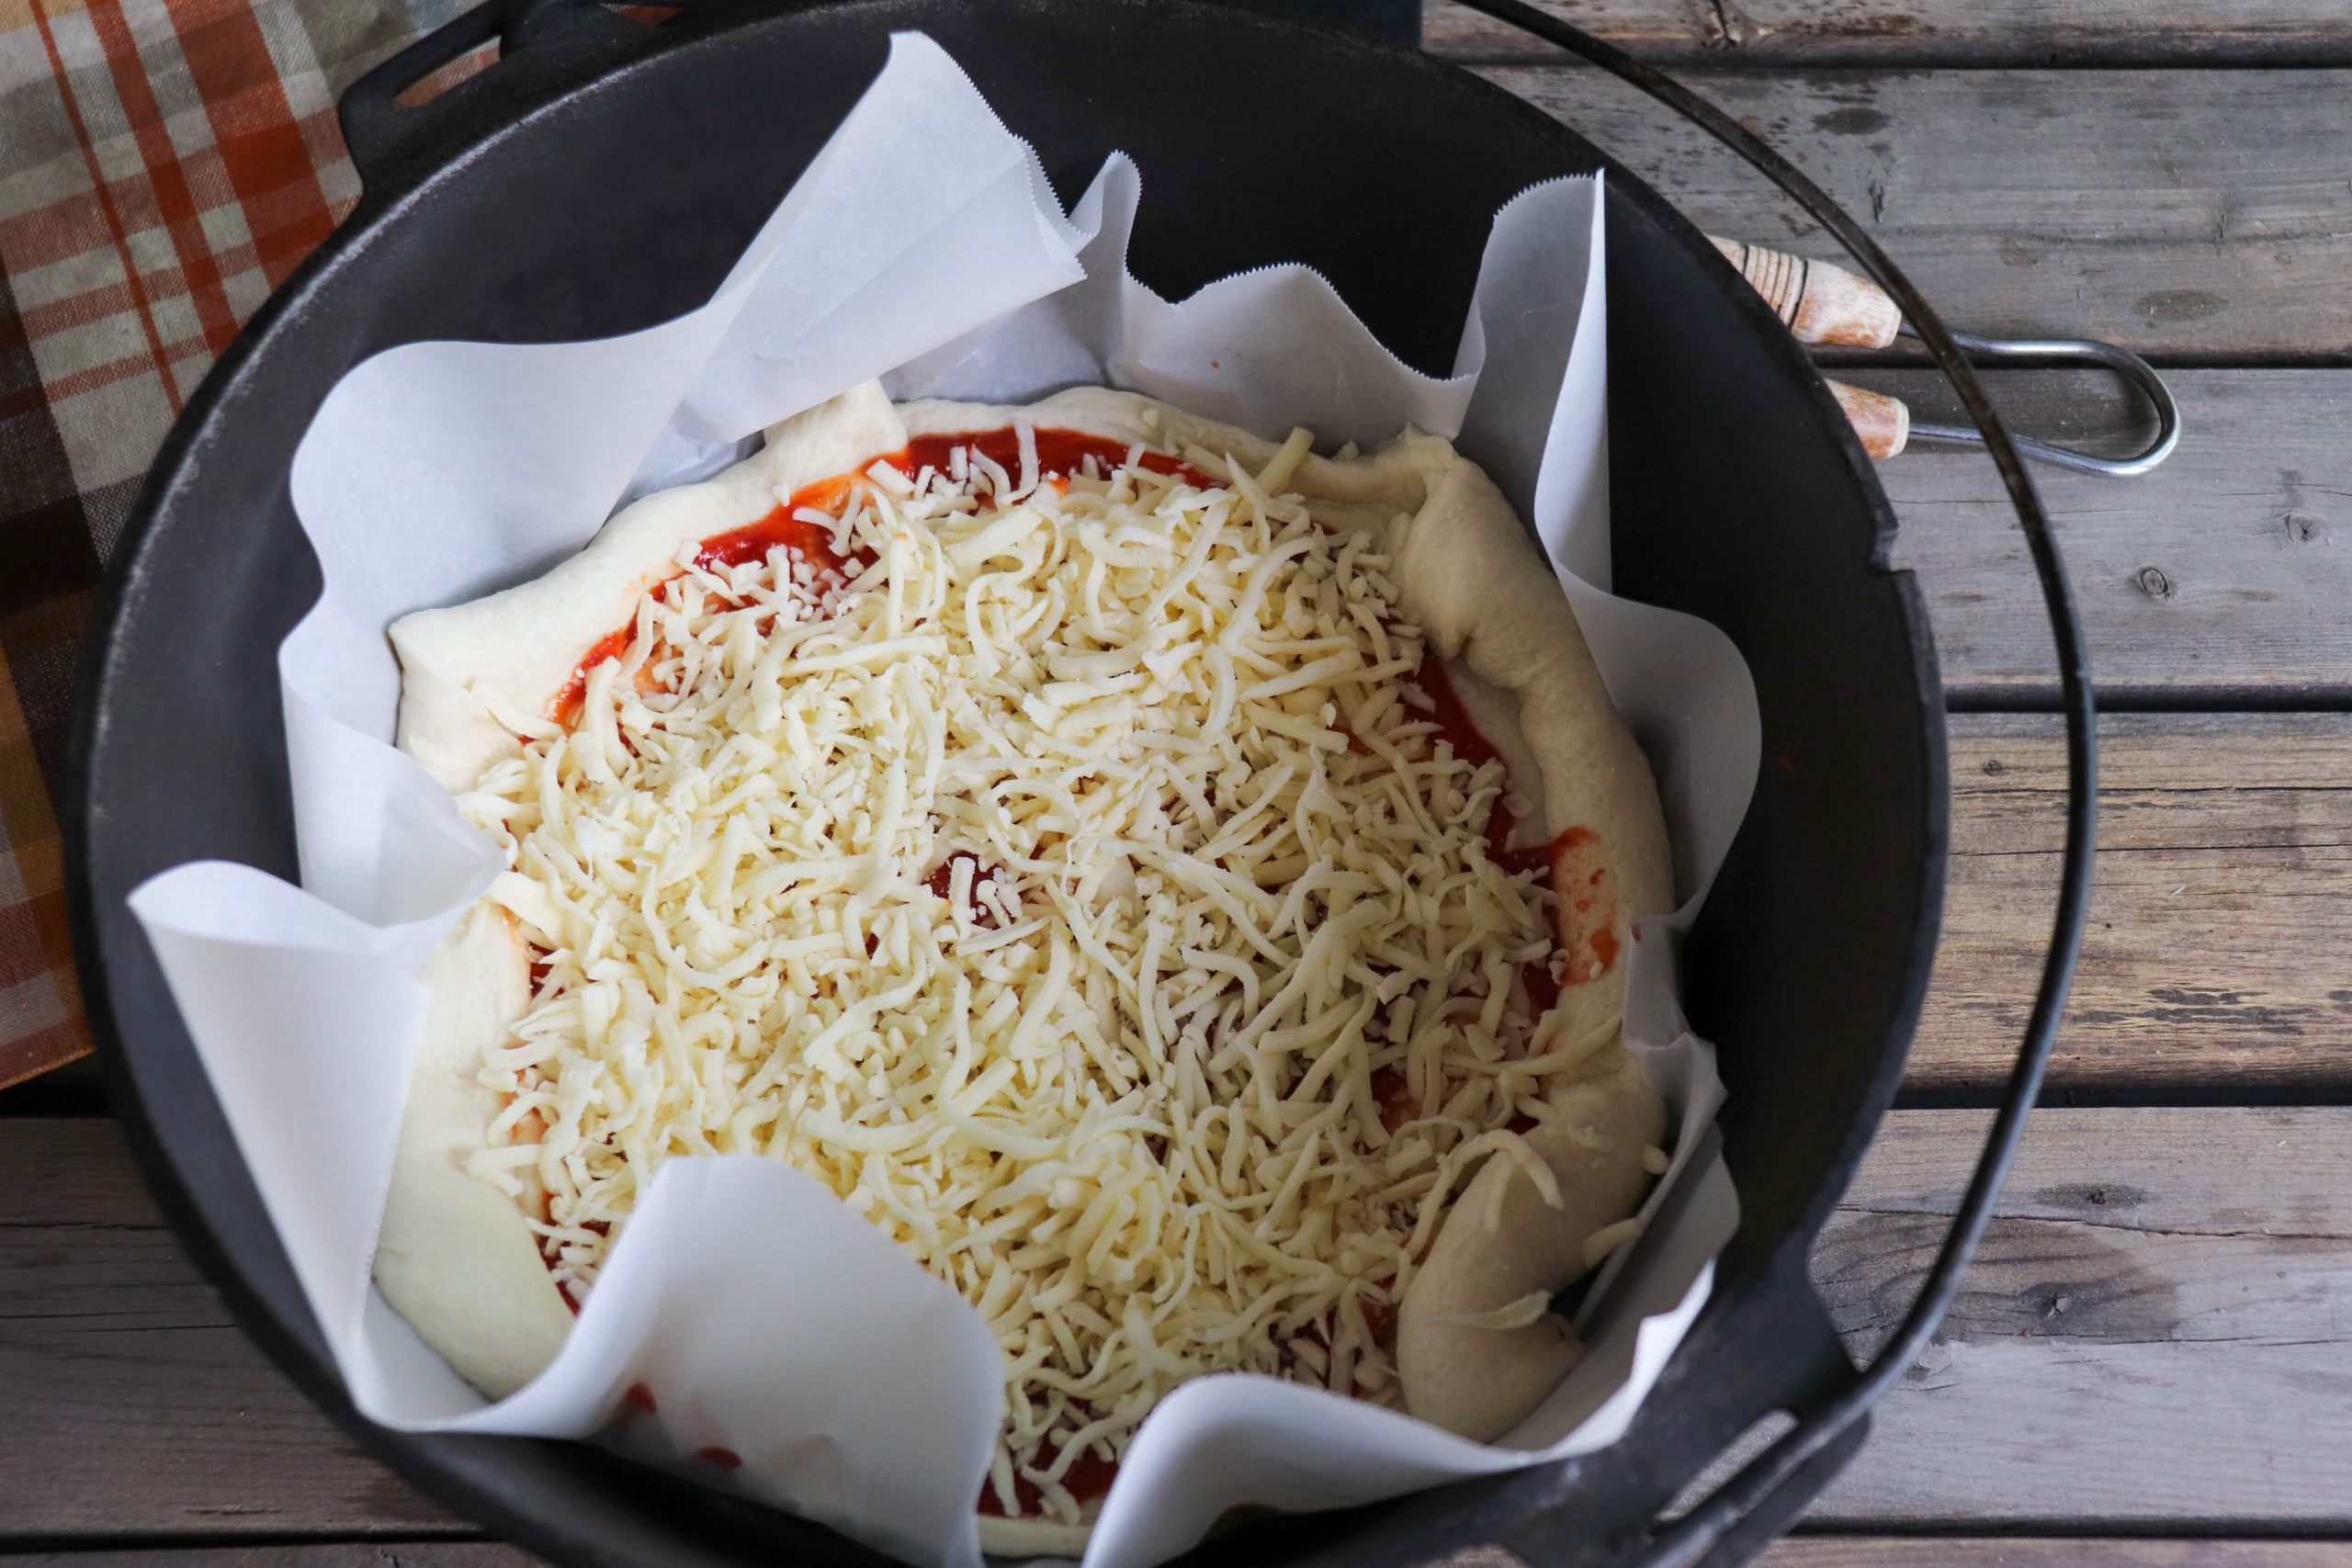 https://campfirefoodie.com/wp-content/uploads/2021/05/Dutch-Oven-Pizza-Recipe-6-scaled.jpg